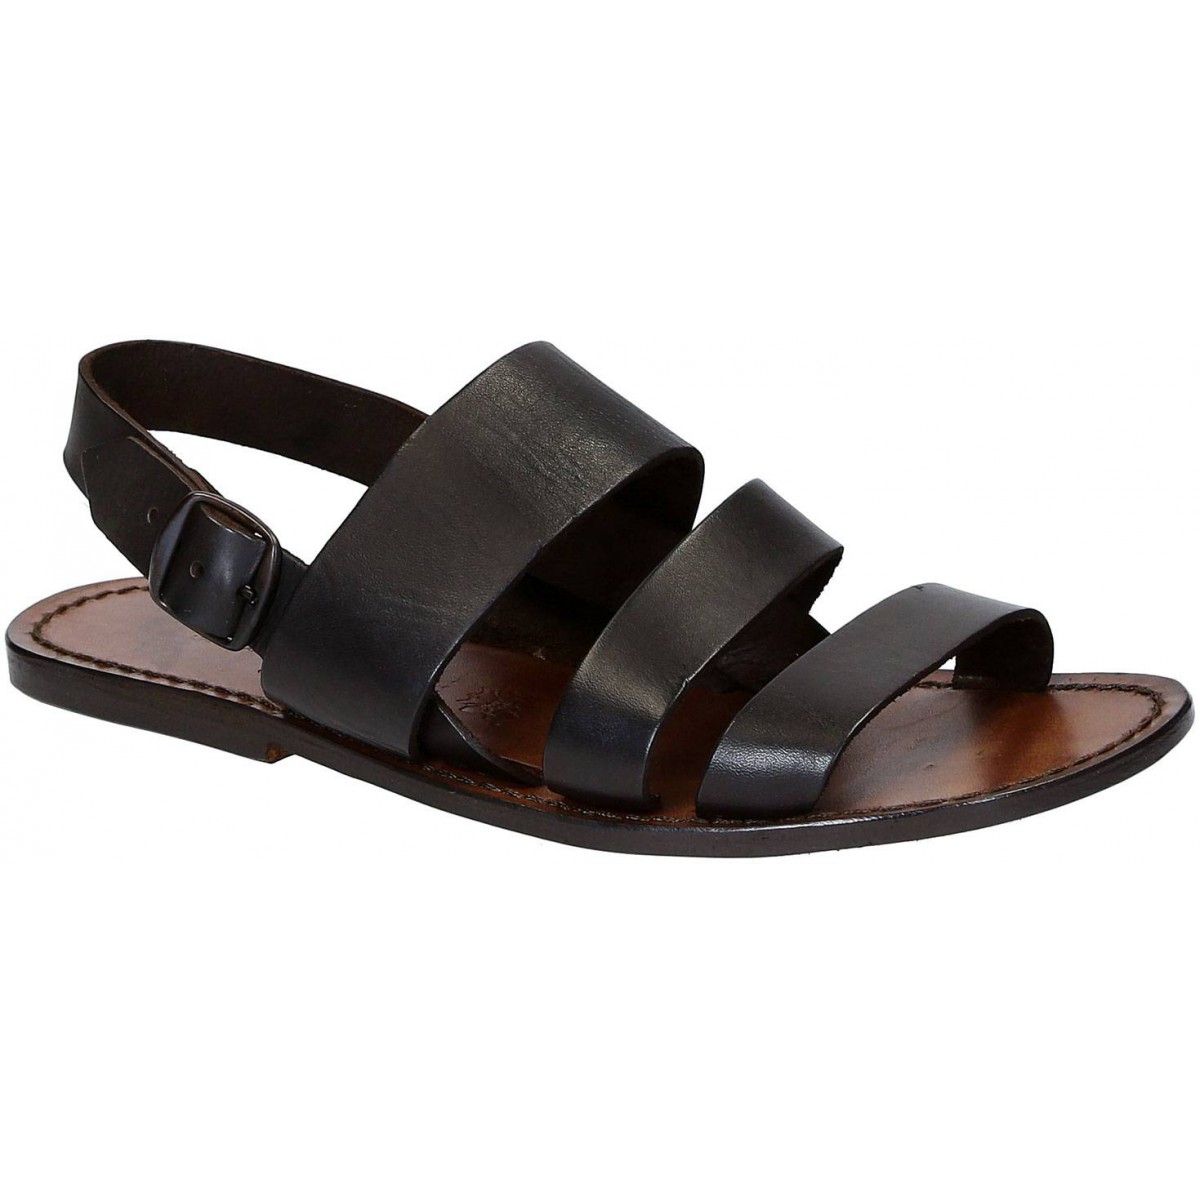 Brown Leather Sandals Handmade In Italy For Men S 